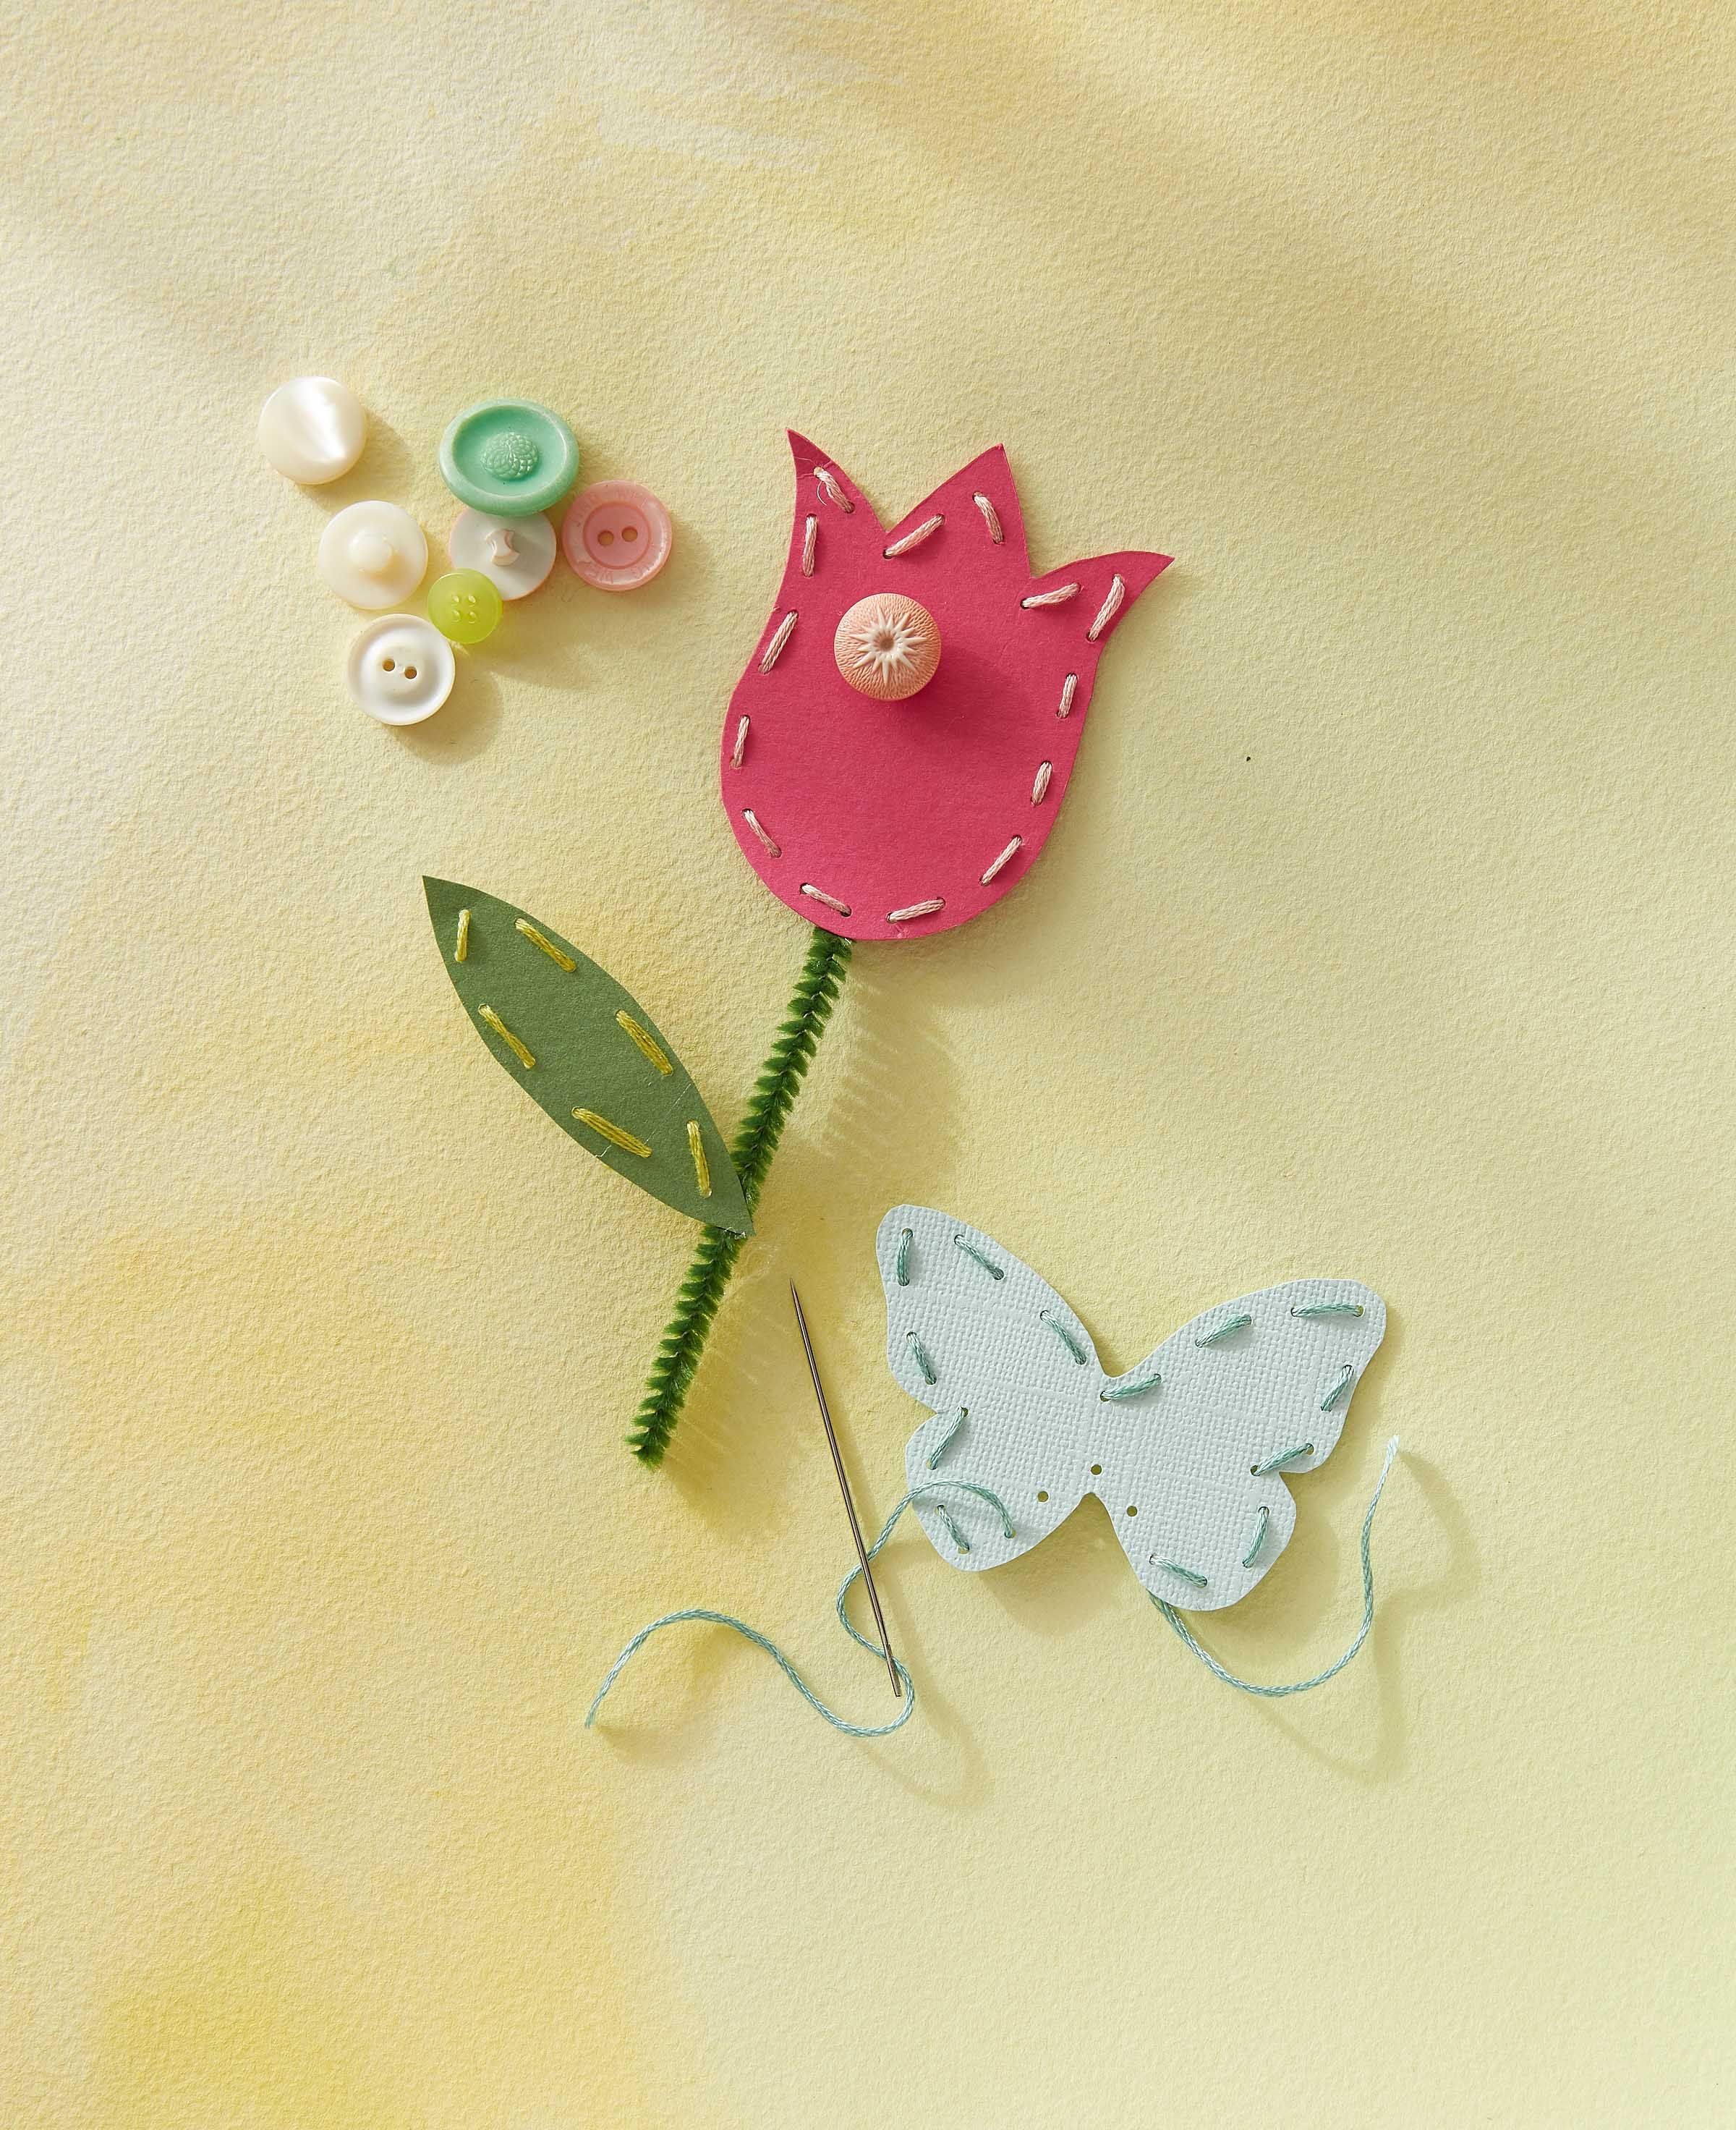 20+ Easy Mother's Day Crafts for Kids - Happiness is Homemade